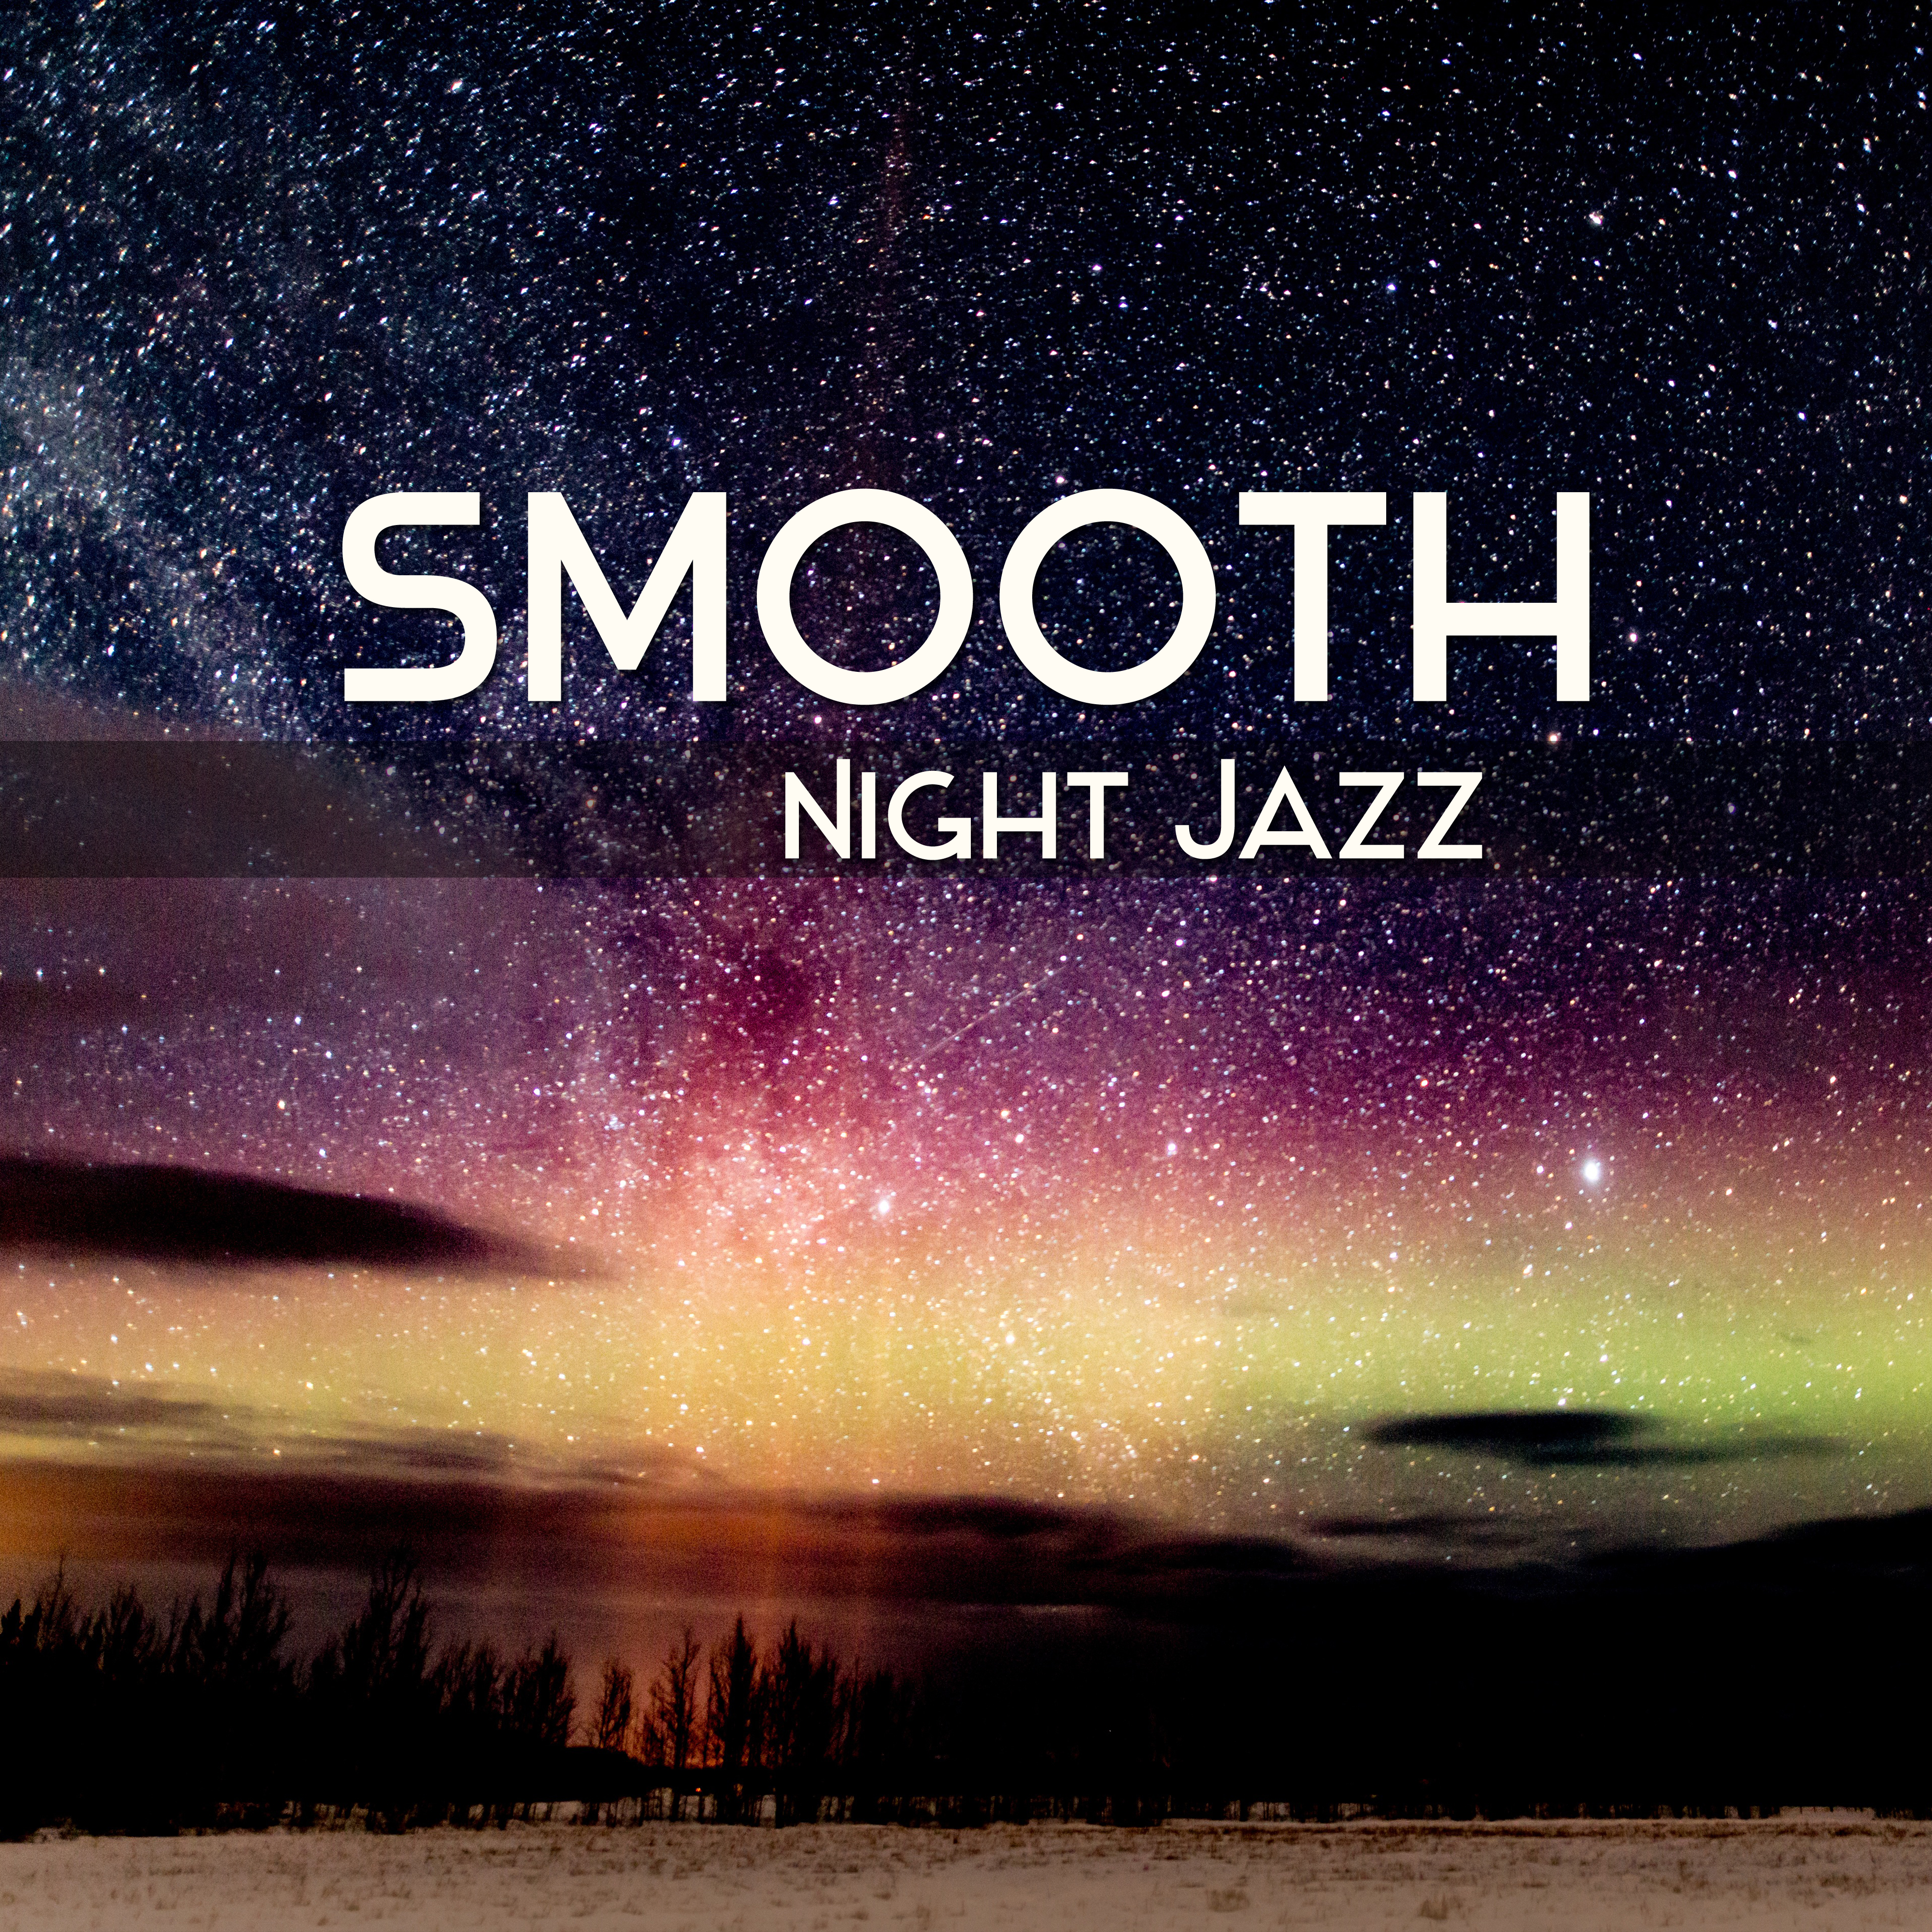 Smooth Night Jazz  Calming Jazz Note, Evening Melodies, Smooth Sounds, Night Rest